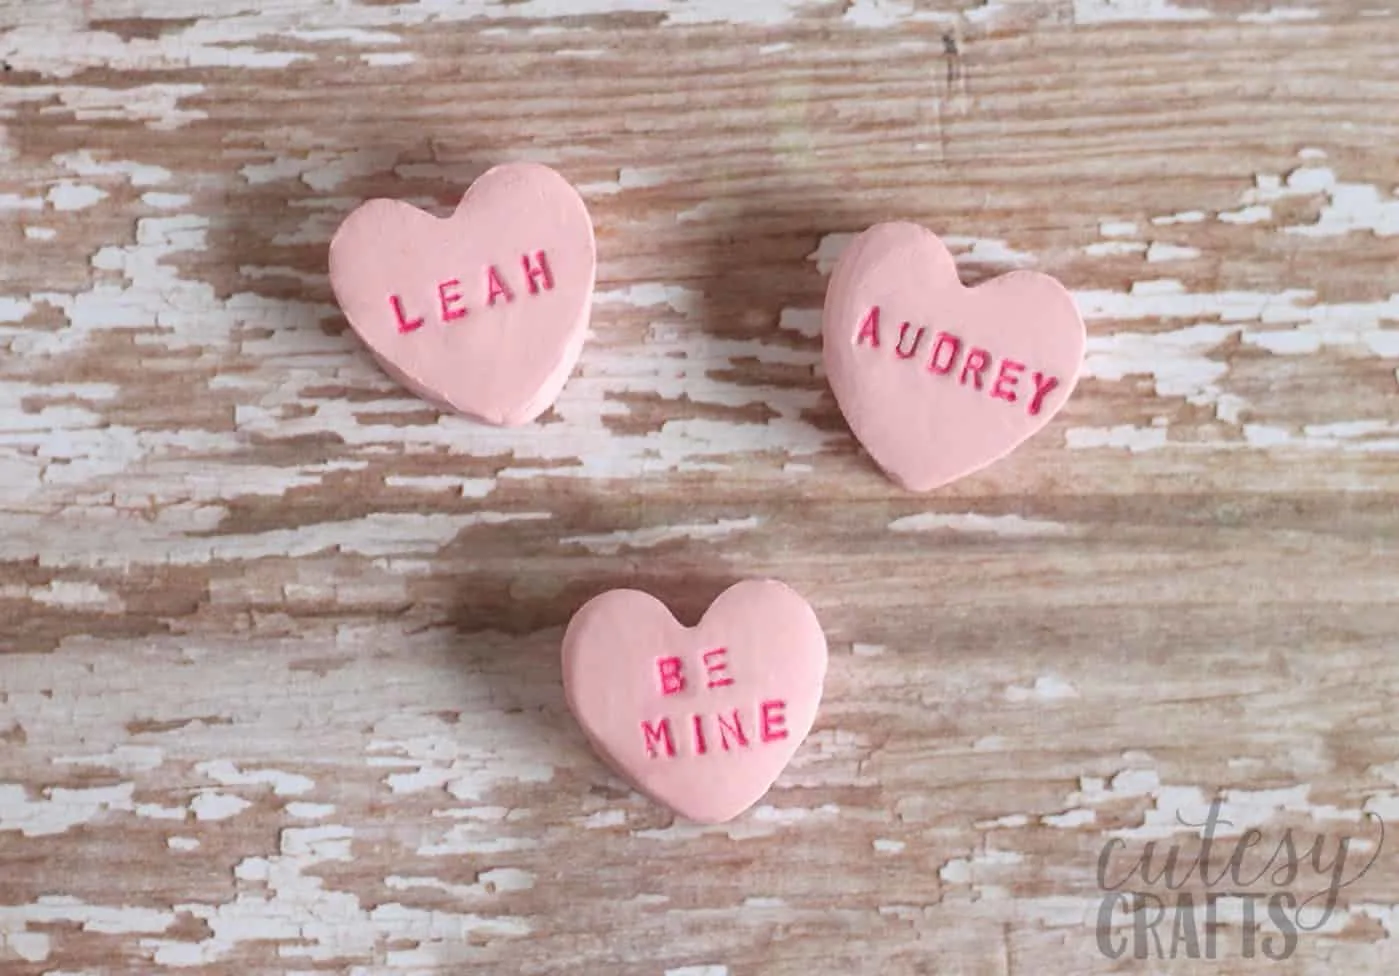 Finished clay hearts that say "Leah," "Audrey," and "Be Mine"